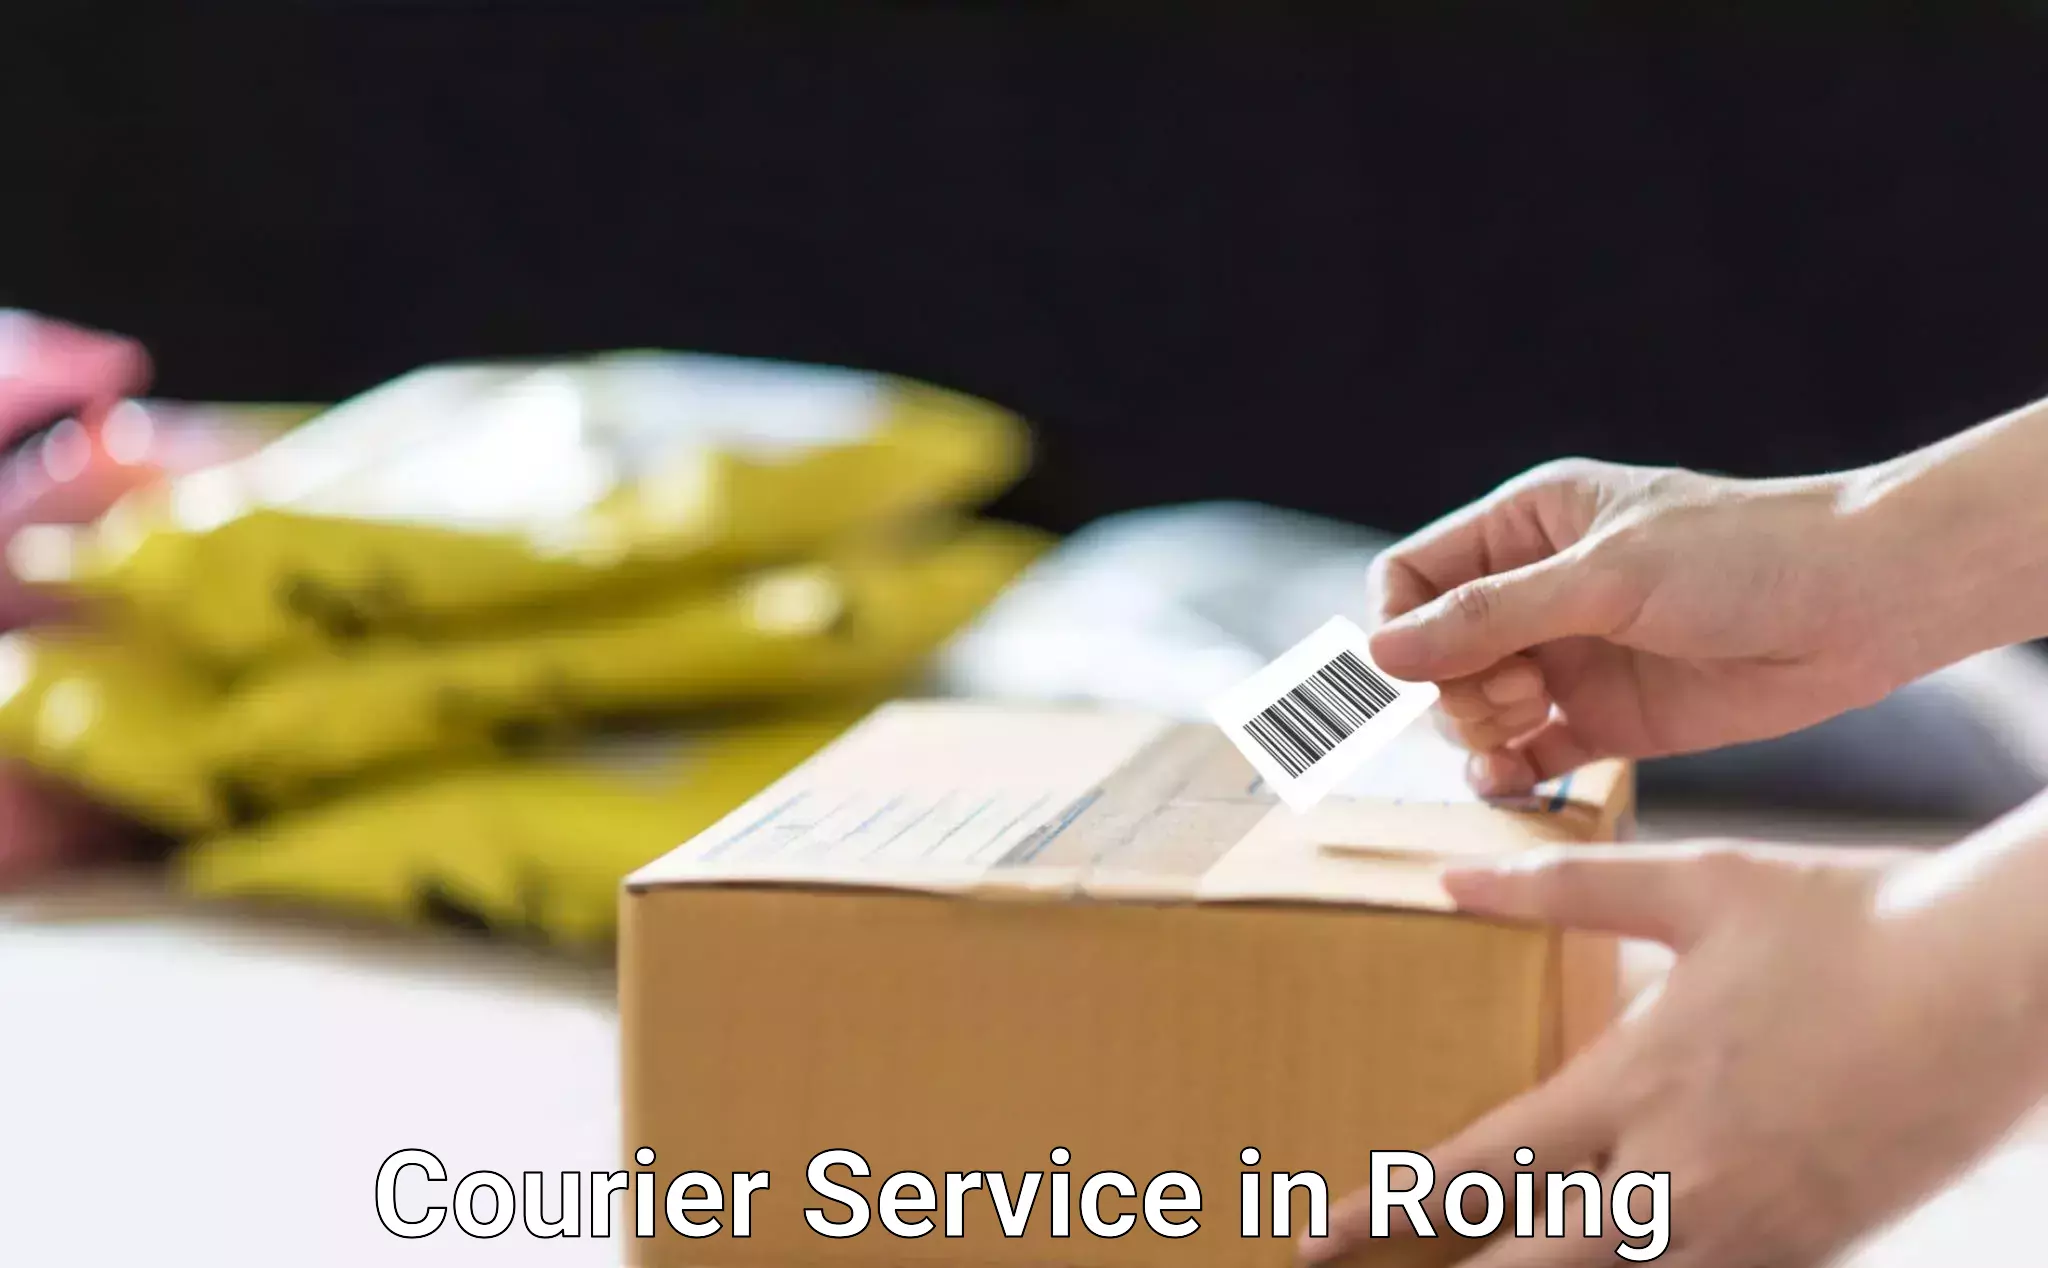 Efficient order fulfillment in Roing